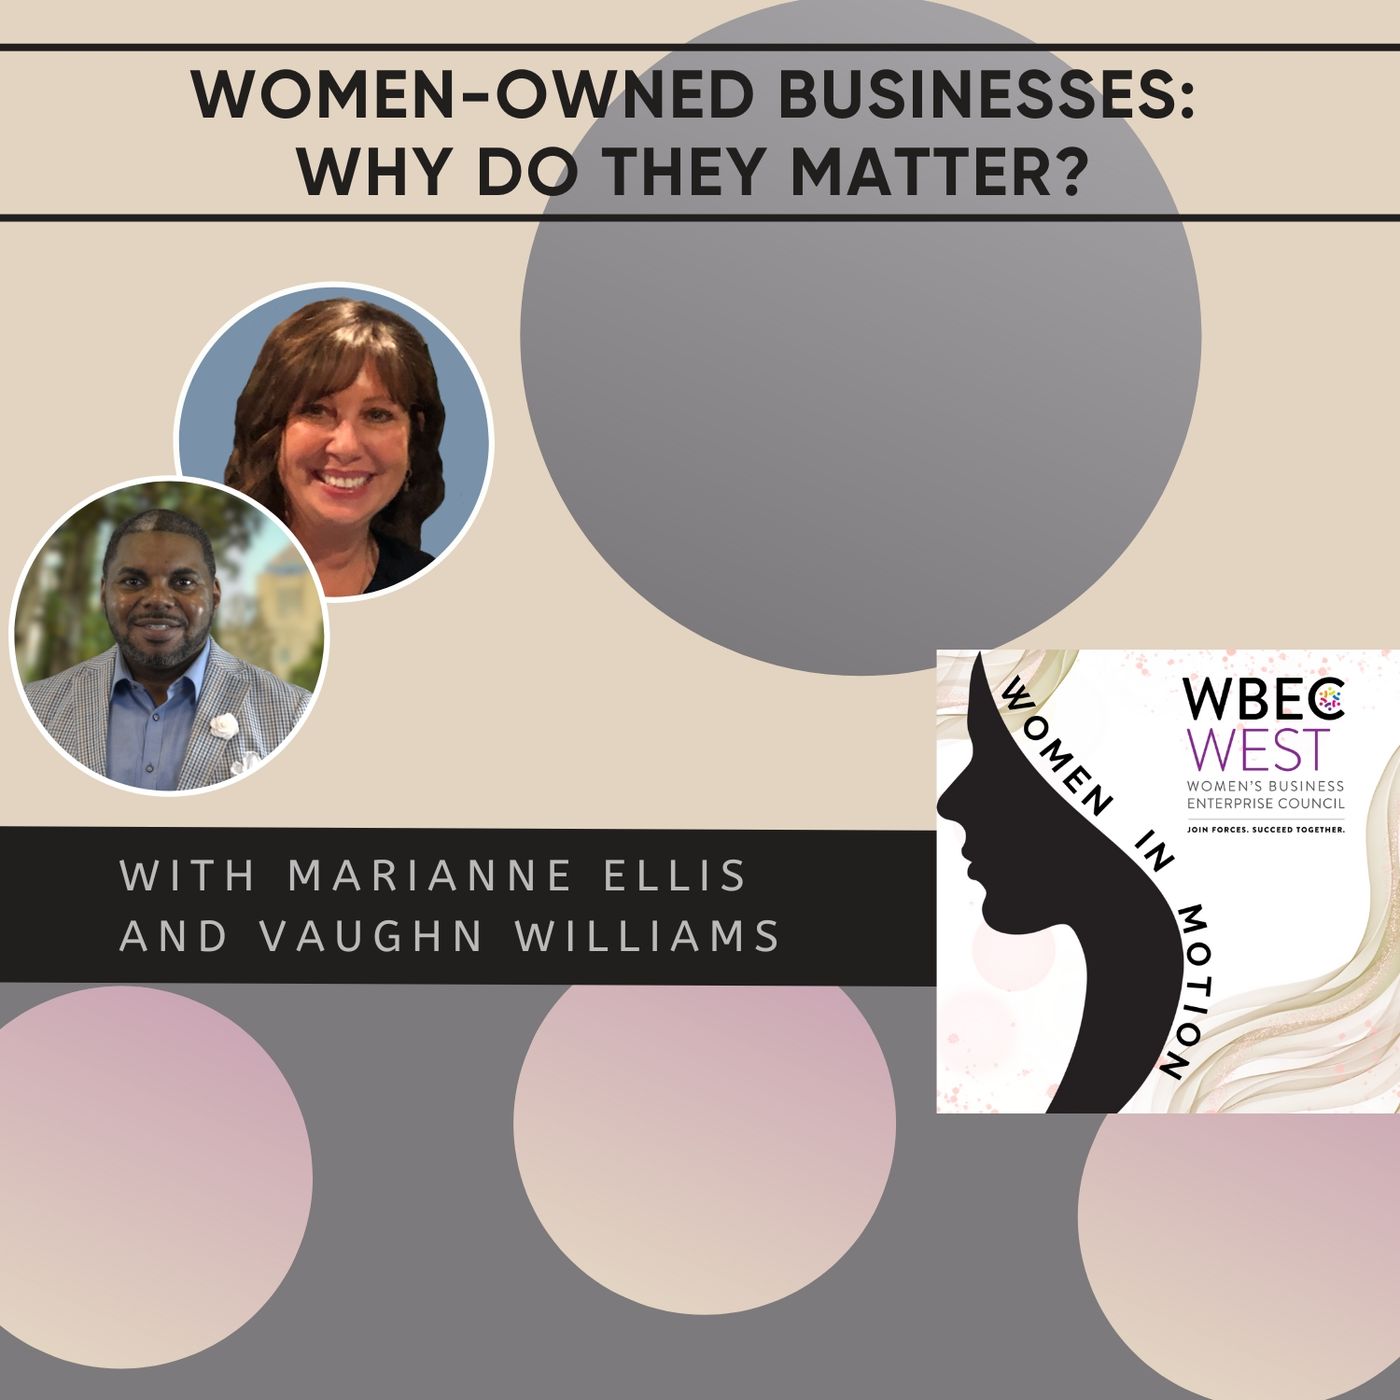 Women-Owned Businesses: Why Do They Matter?